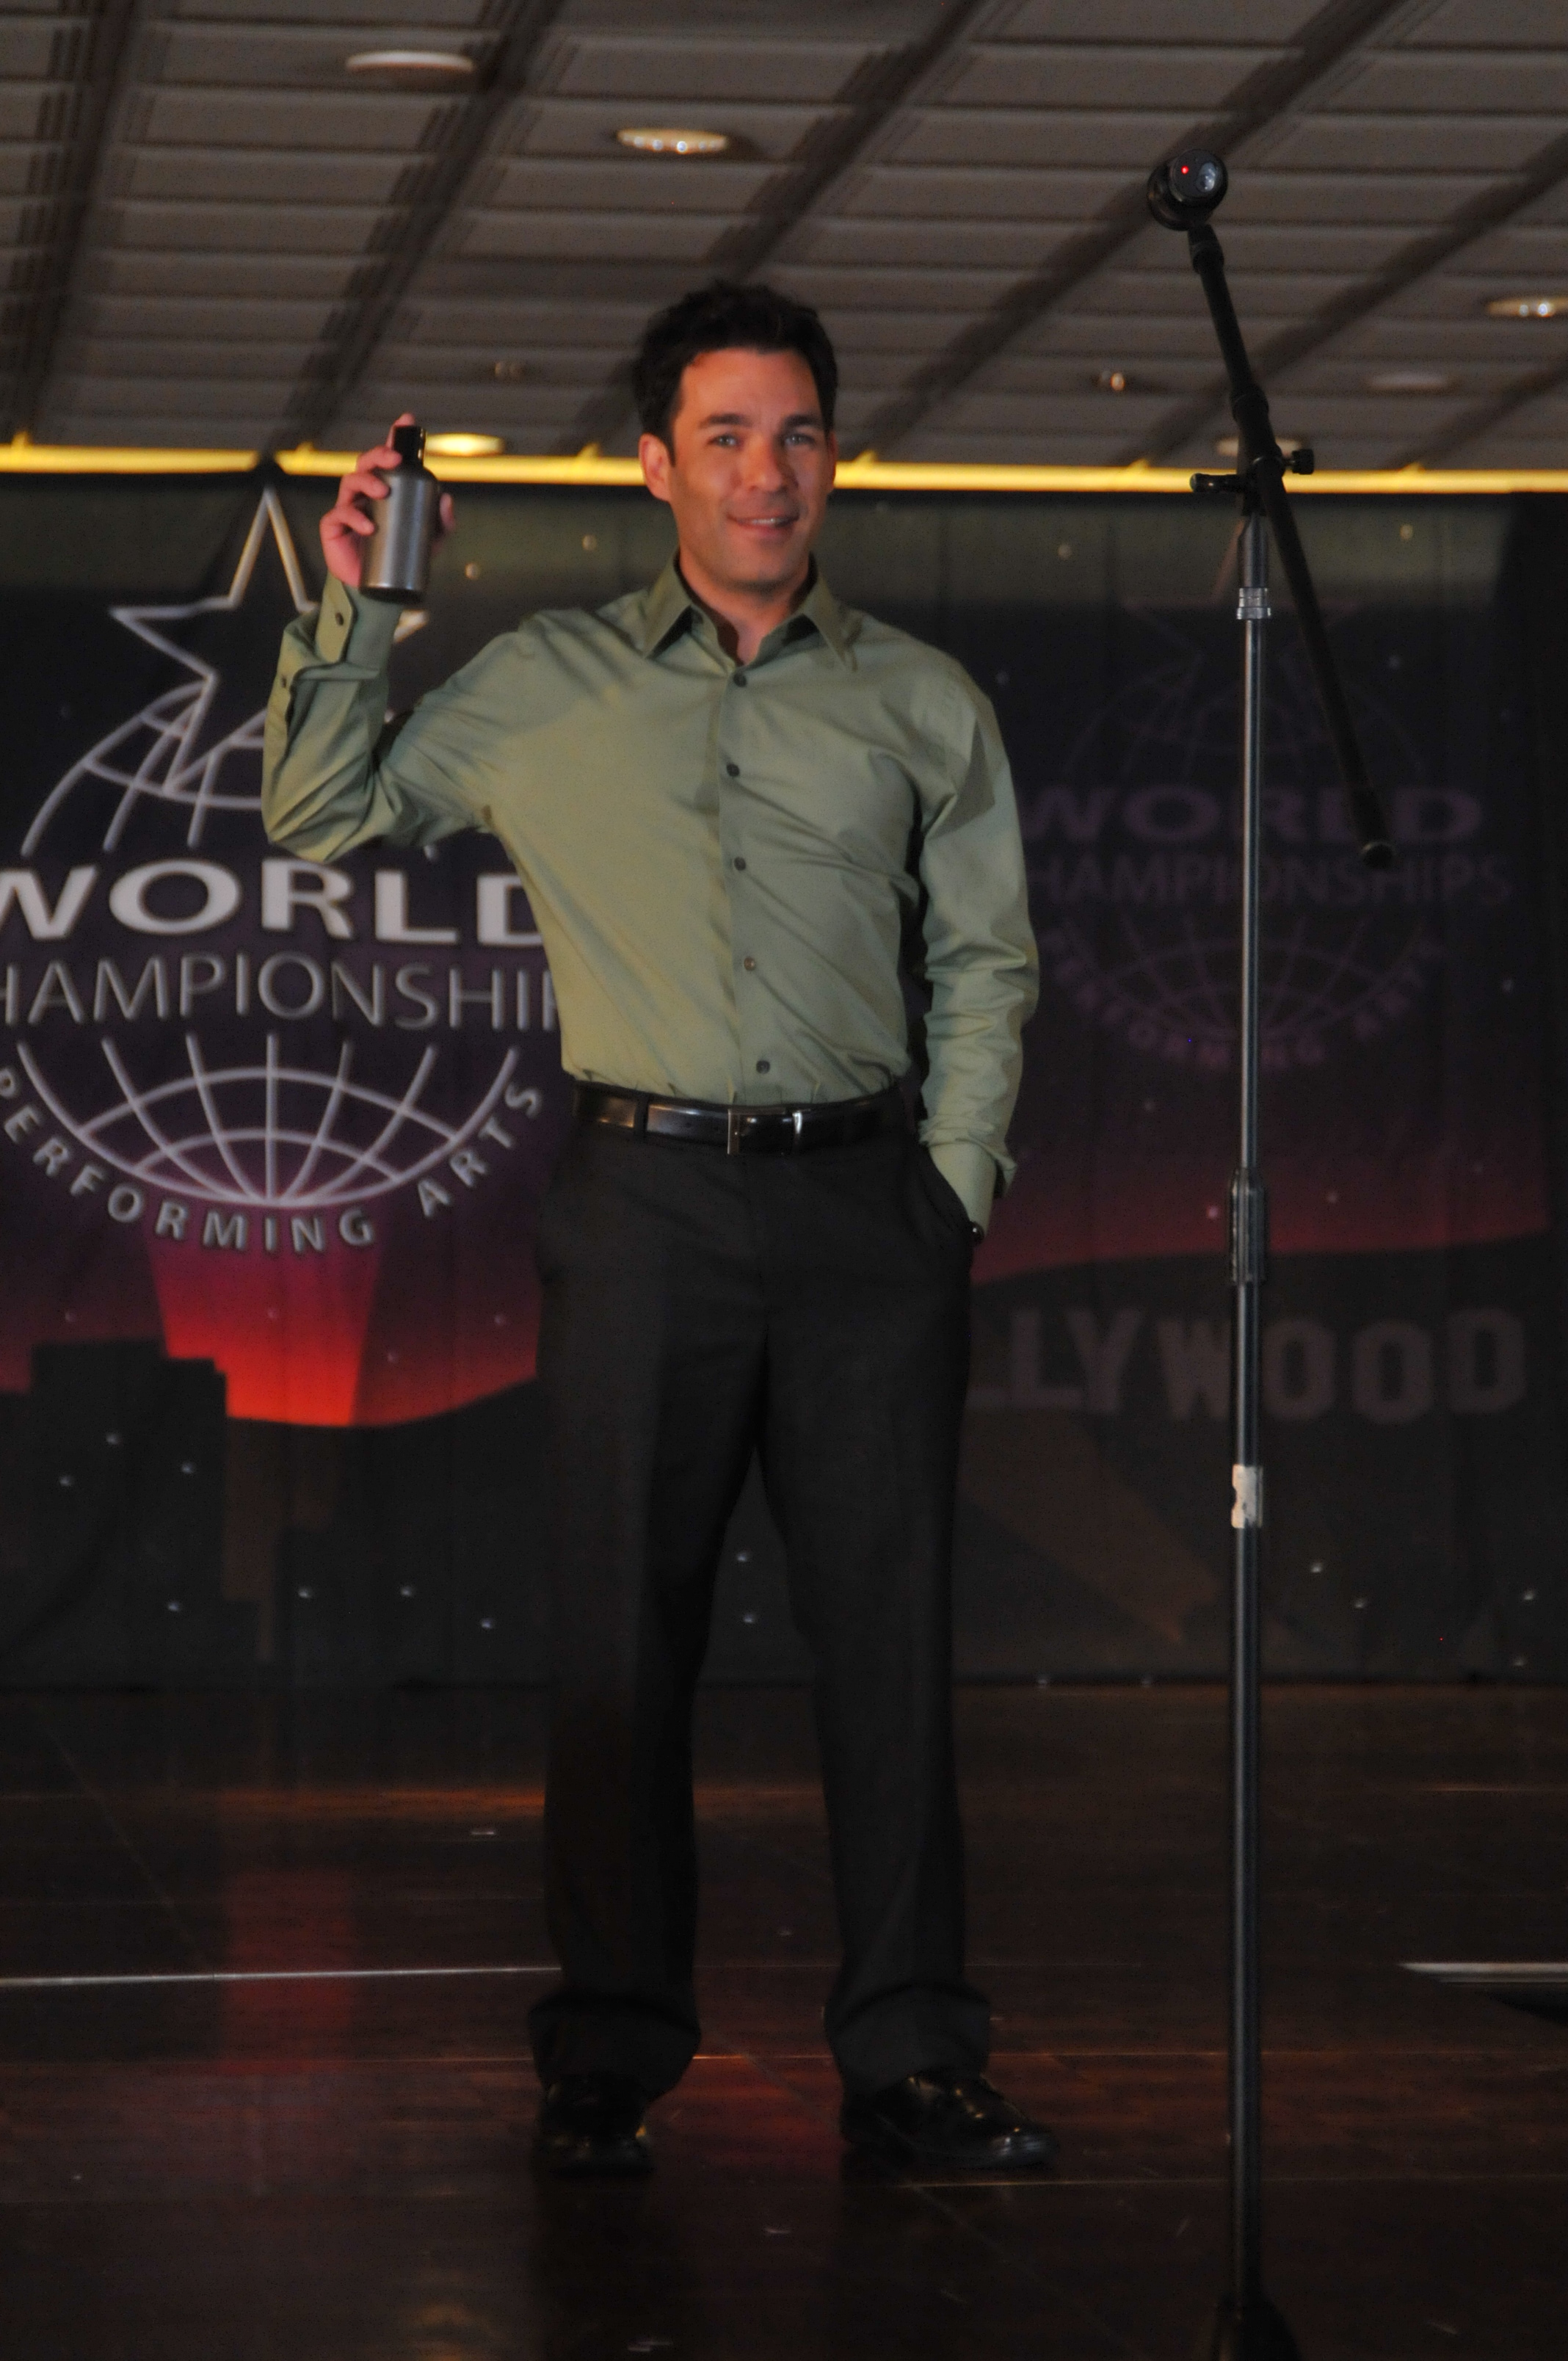 Silver Medal in a contemporary monologue at the World Championships Of Performing Arts Hollywood, CA